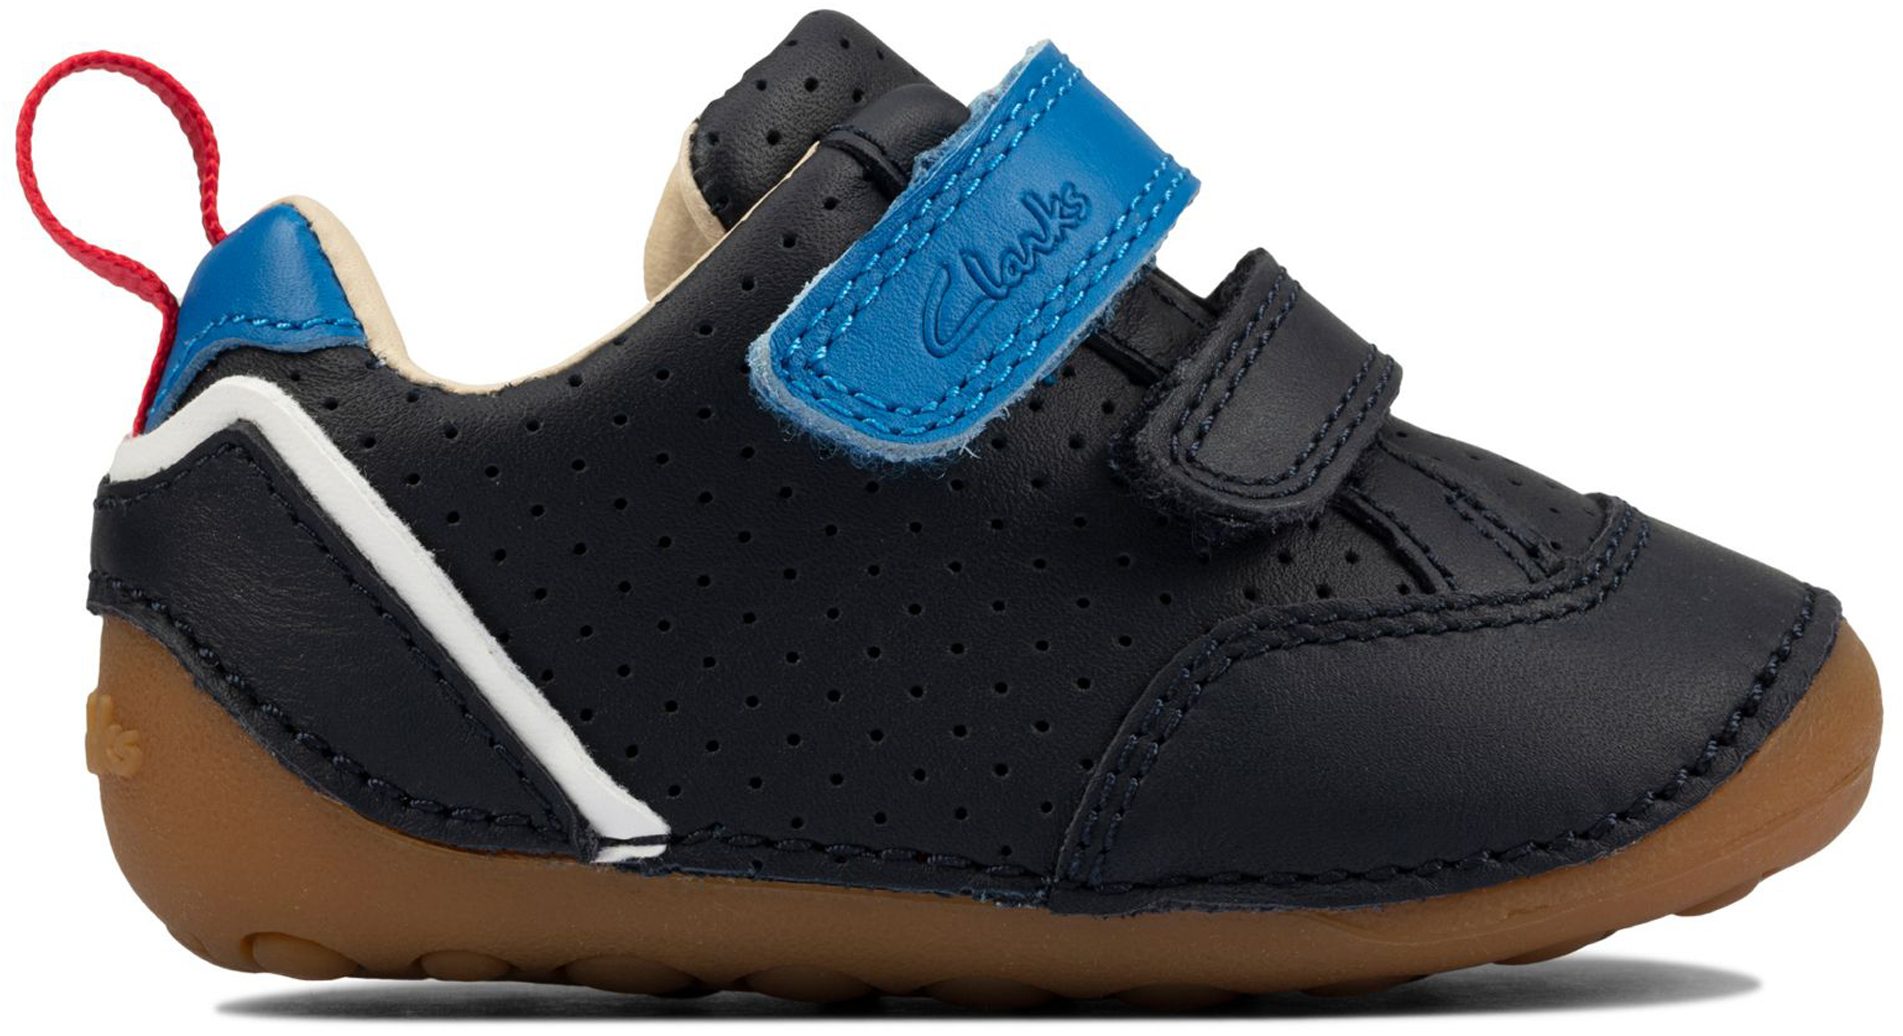 Clarks Tiny Sky Toddler Navy Leather 26157629 - Boys Shoes - Humphries ...